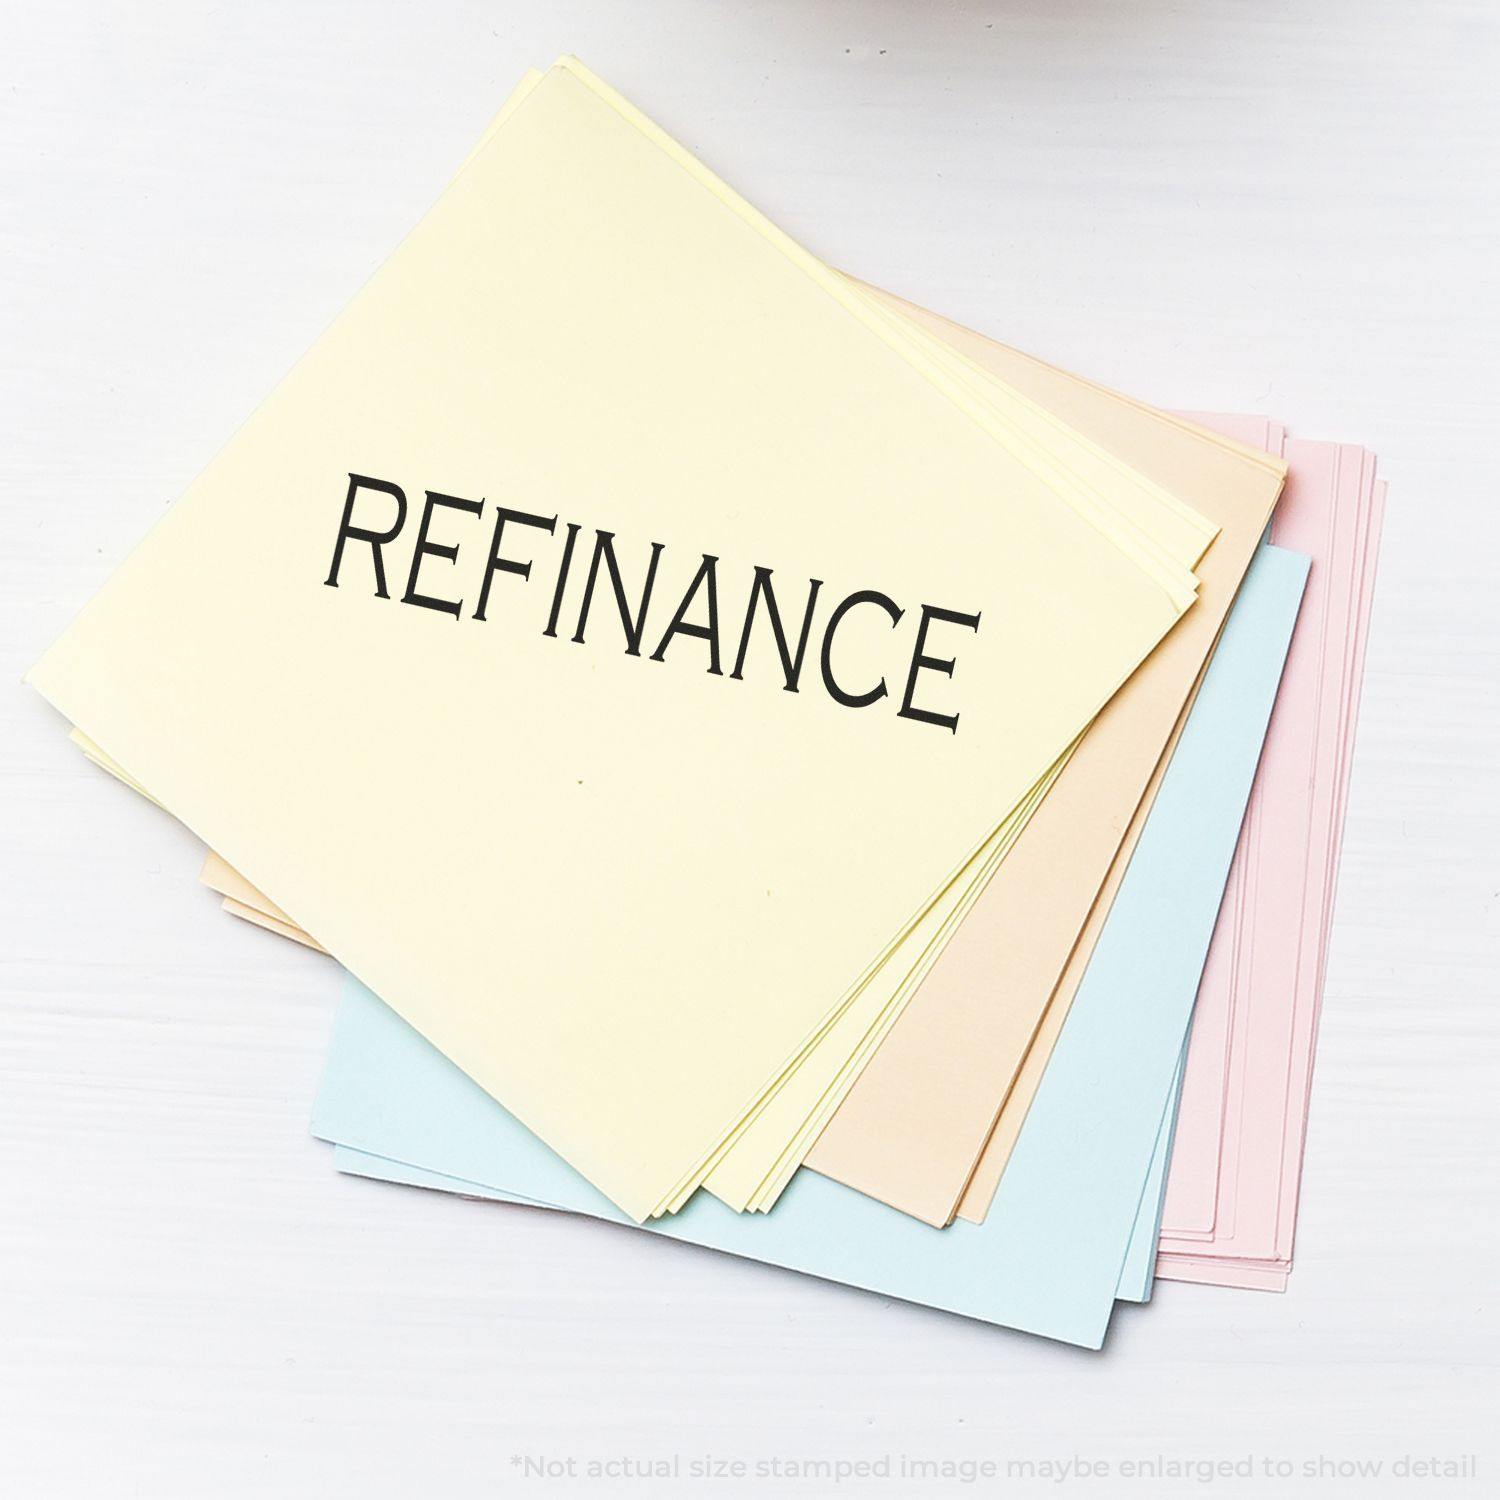 A stock office rubber stamp with a stamped image showing how the text "REFINANCE" in a large font is displayed after stamping.